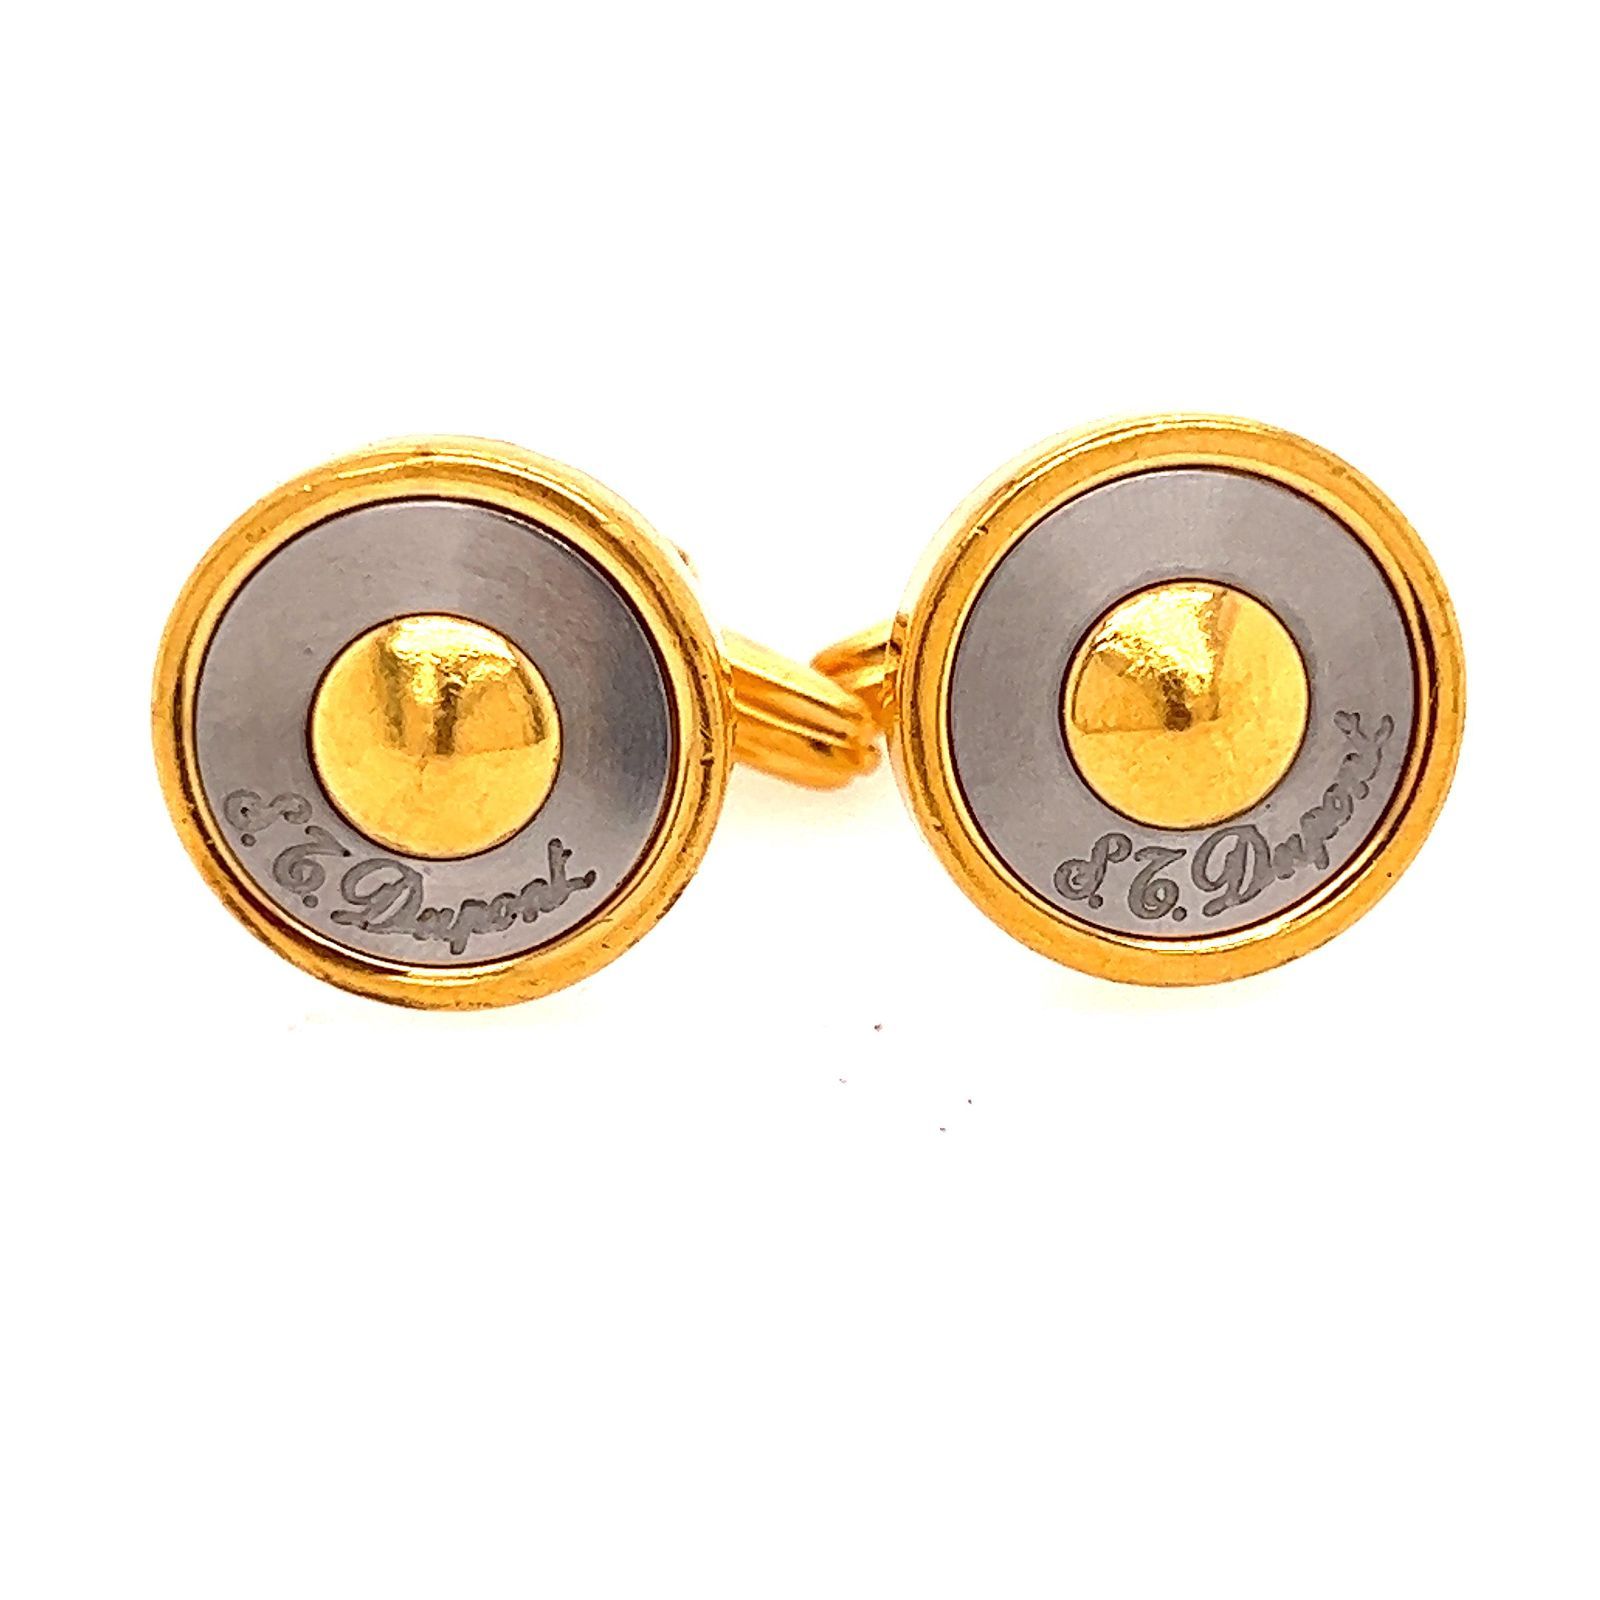 18k DUPONT Two Tone Cufflinks 18k DUPONT Two Tone Weight 13.43g Cufflinks Measur&hellip;